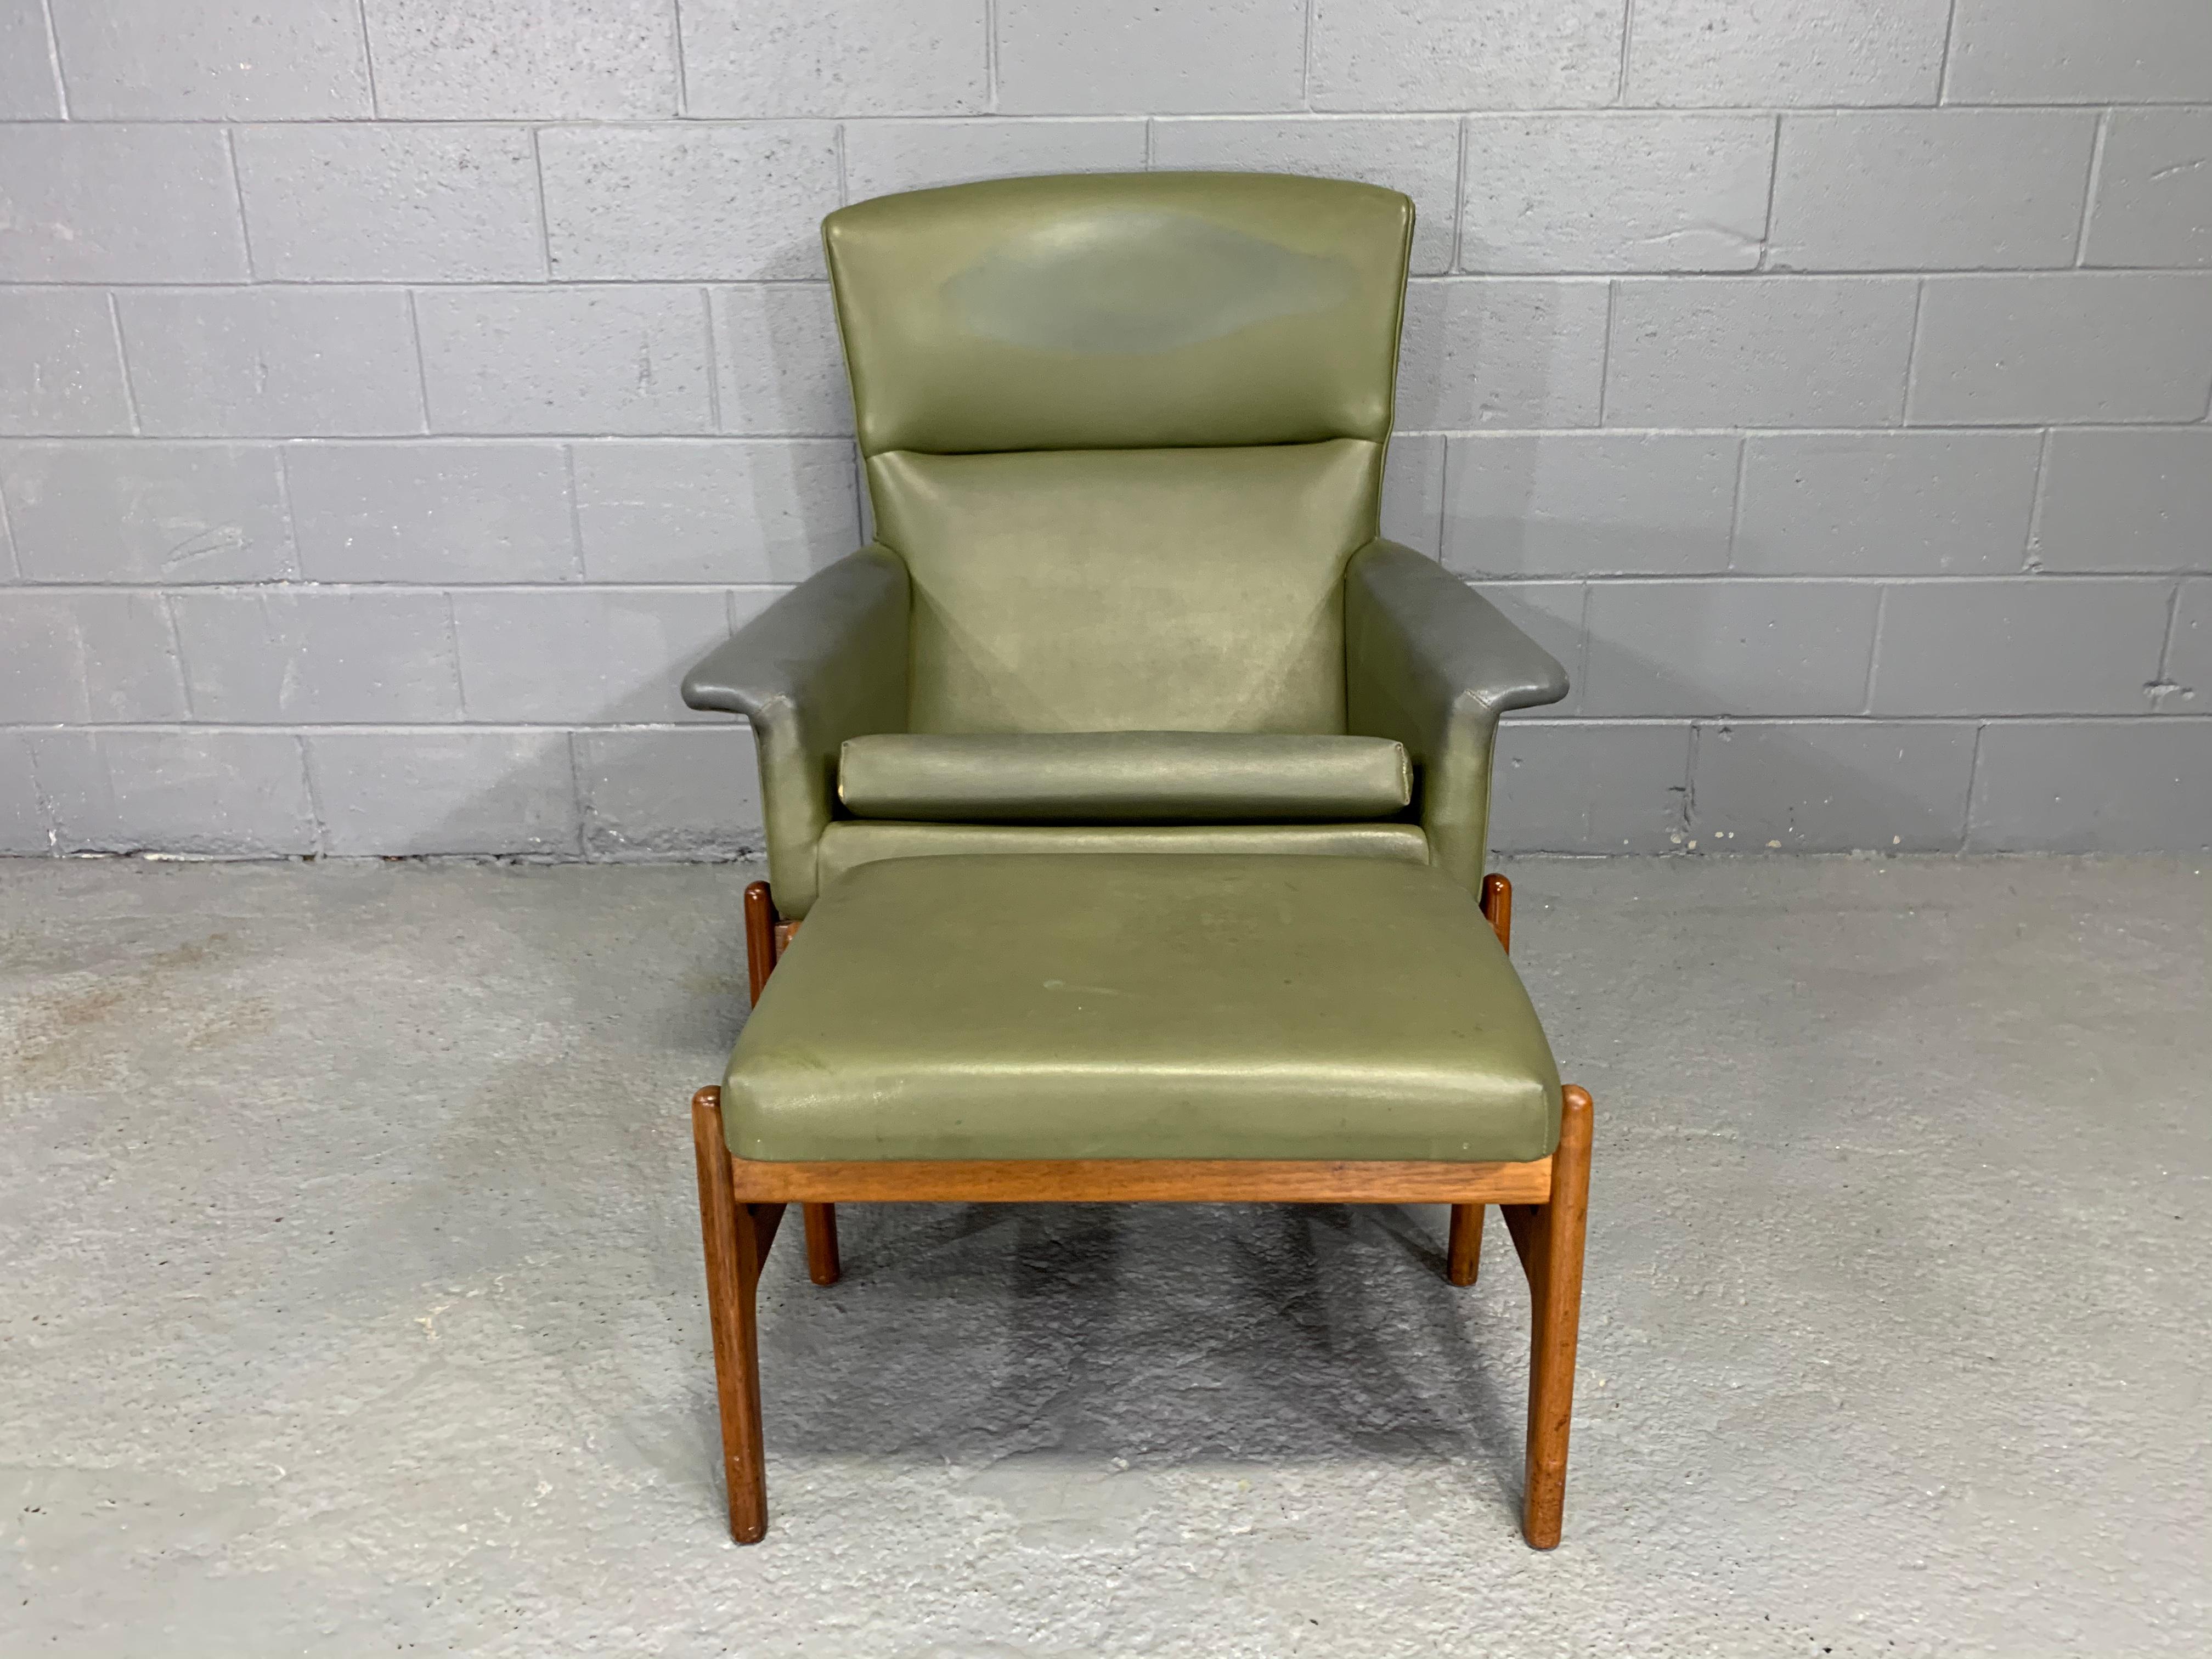 This mid-century modern easy chair / recliner by Folke Olsson is upholstered with the original faux leather and was manufactured by Dux of Sweden in the 1960s.

The design of the chair is extremely elegant, well-proportioned  comfortable chair that